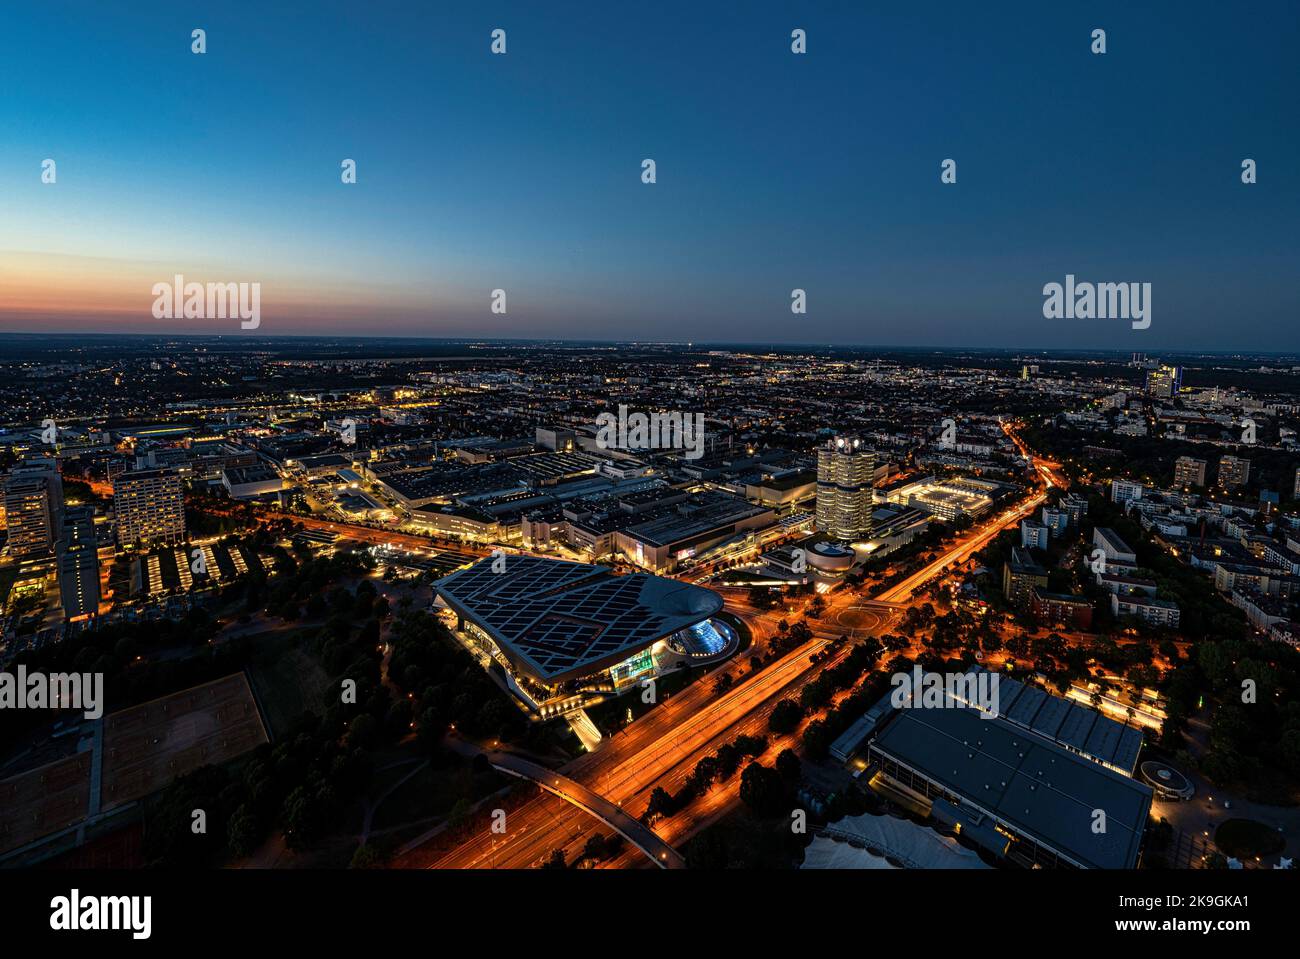 An aerial view of BMW headquarters in Munich, Germany at dusk Stock Photo